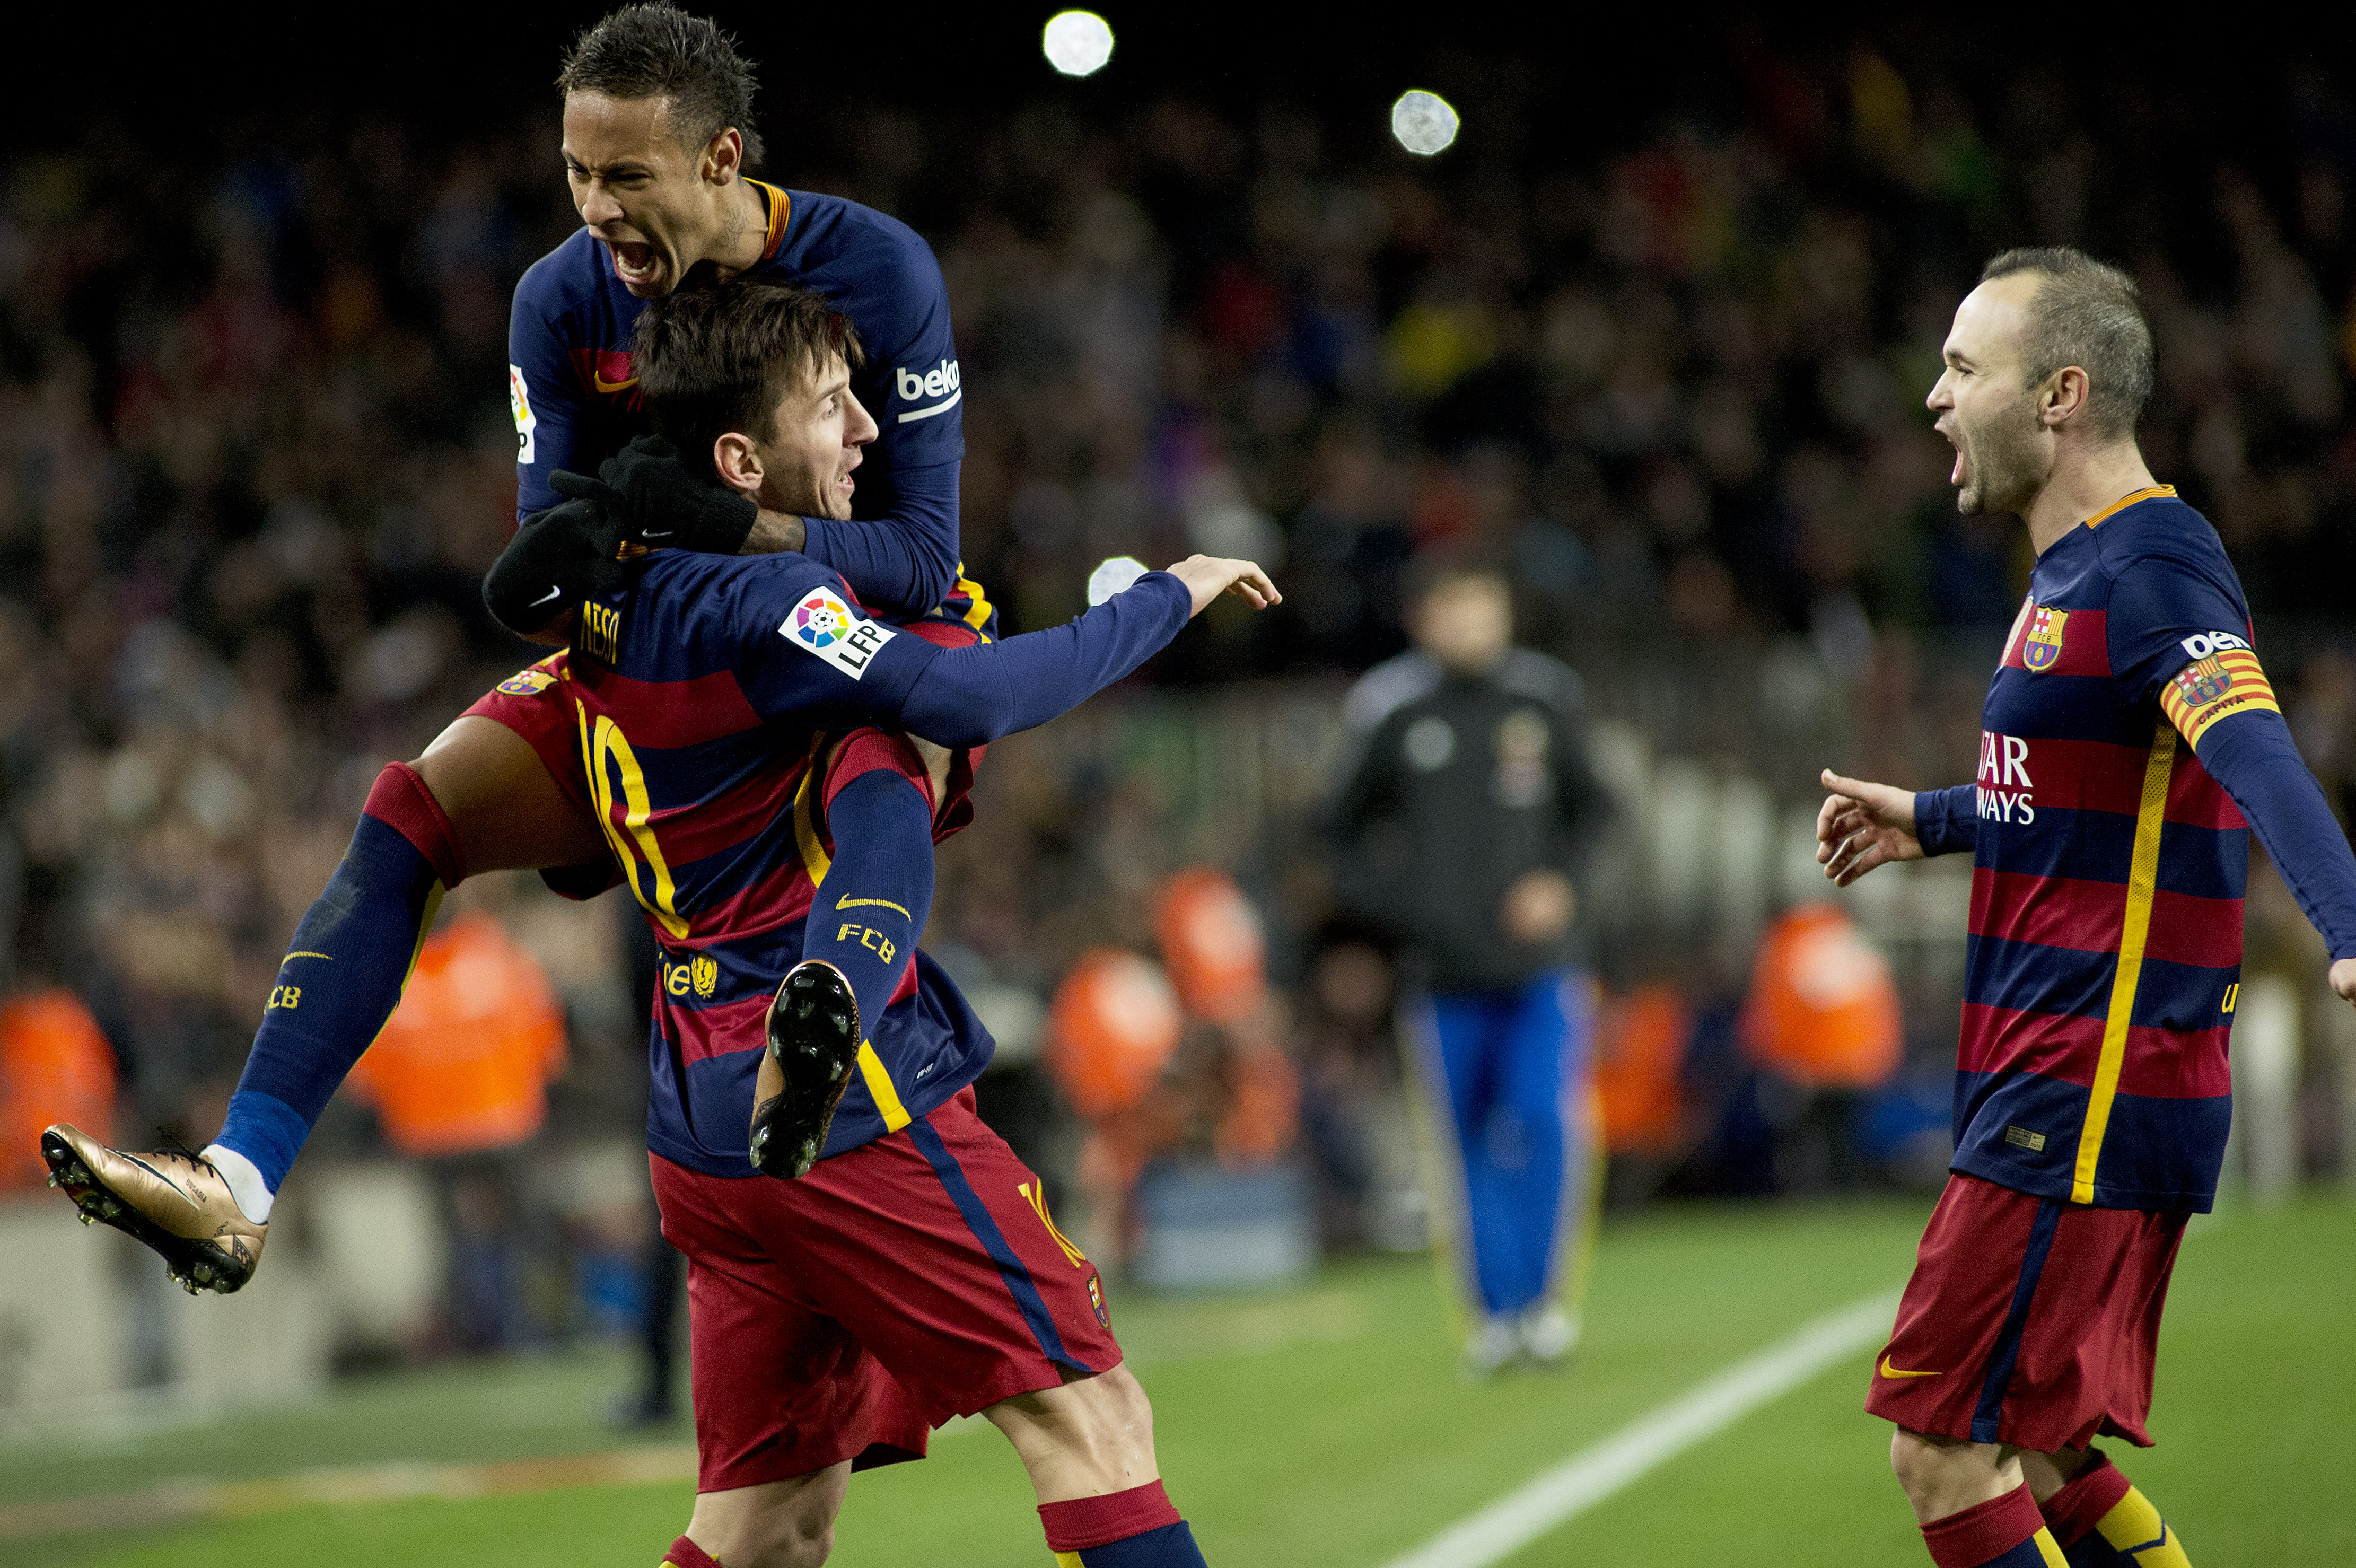 (160107) -- BARCELONA, Jan. 7, 2016 (Xinhua) -- FC Barcelona's Argentinian forward Lionel Messi (Bottom L) celebrates after scoring with FC Barcelona's Neymar and Iniesta during Spanish King's Cup eighth final match first round between FC Barcelona and RCD Espanyol at the Camp Nou stadium in Barcelona, Spain, on Jan. 6, 2016. FC Barcelona won 4-1. (Xinhua/Lino De Vallier)